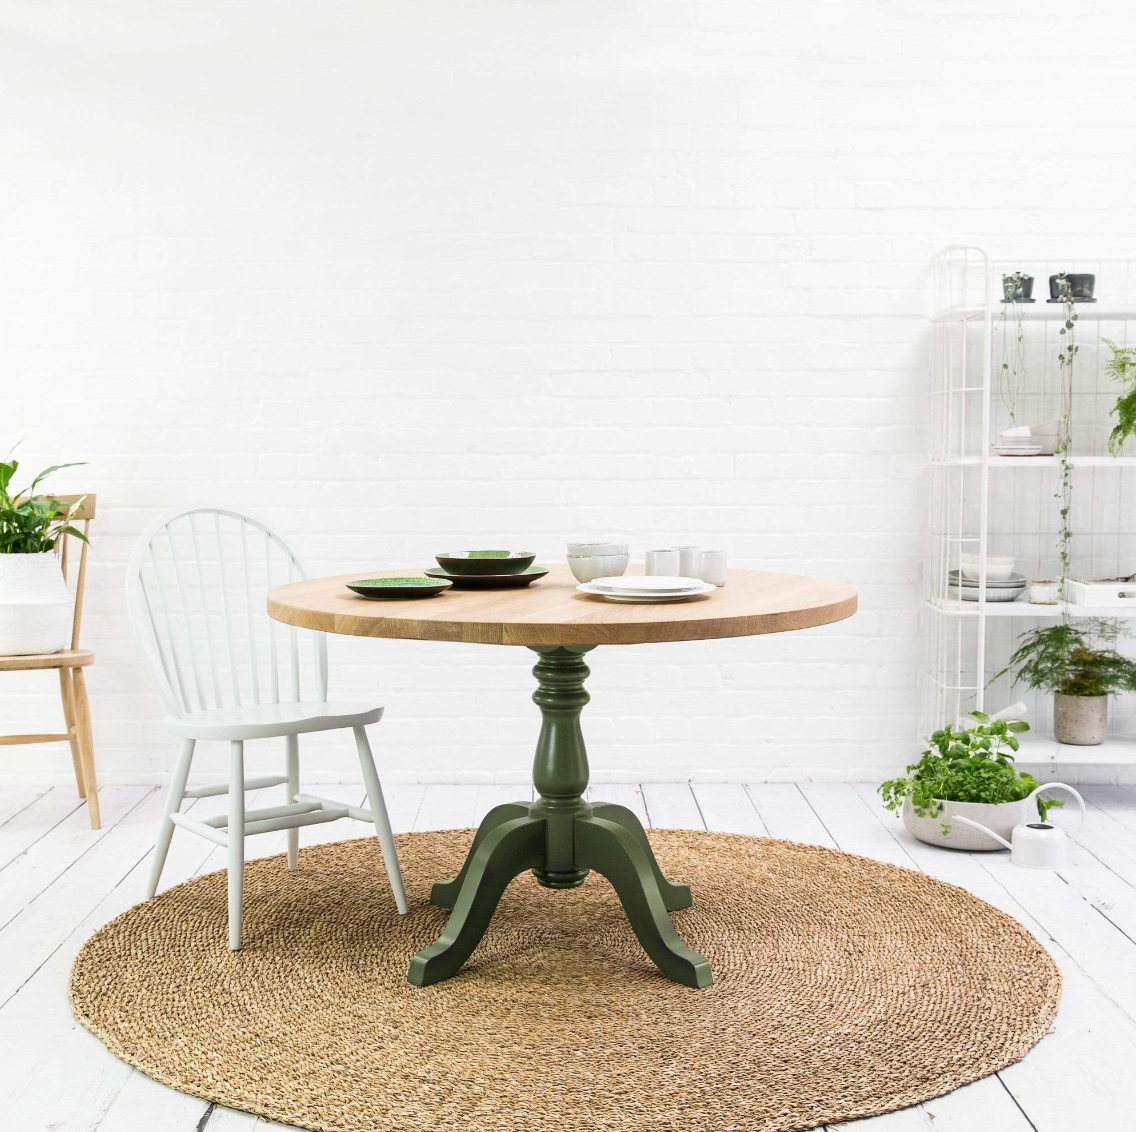 Round dining table with green frame